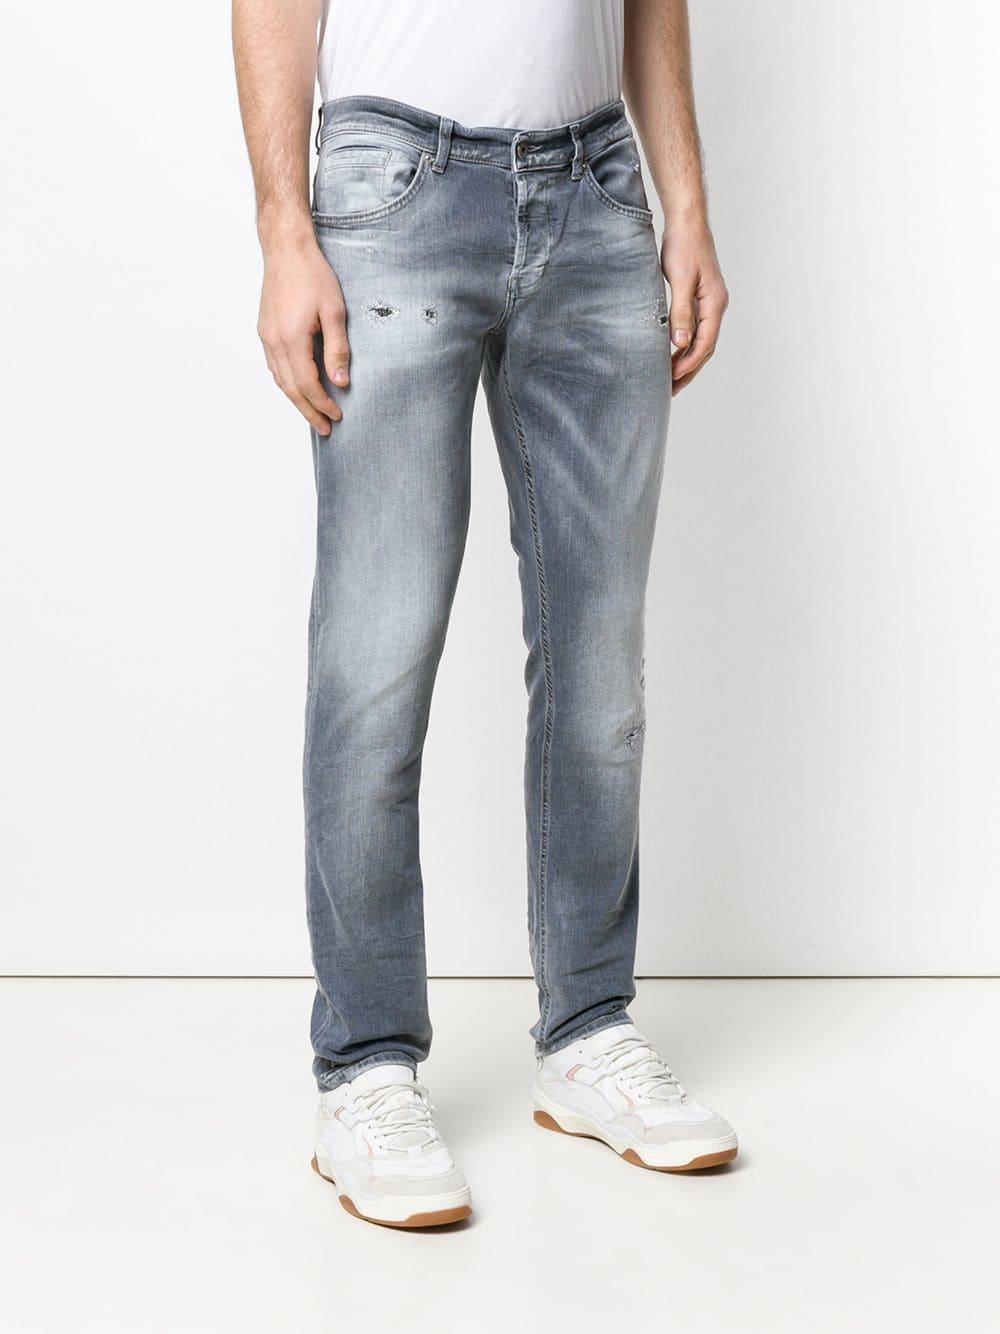 Dondup Denim Faded Slim-fit Jeans in Grey (Gray) for Men - Save 18% - Lyst